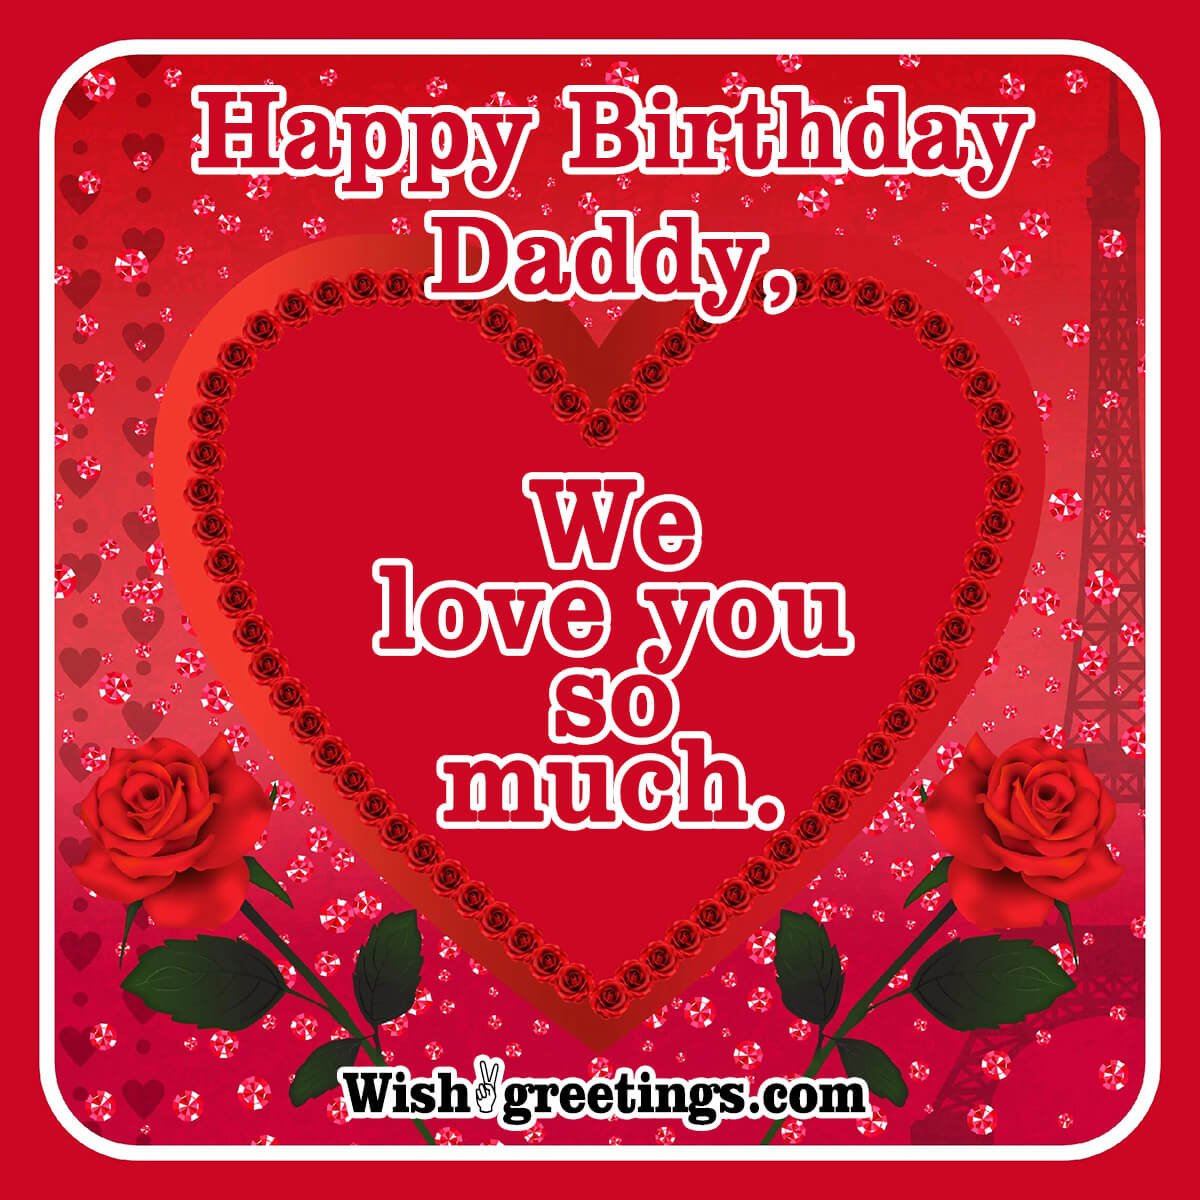 Happy Birthday Wishes Images For Father - Wish Greetings